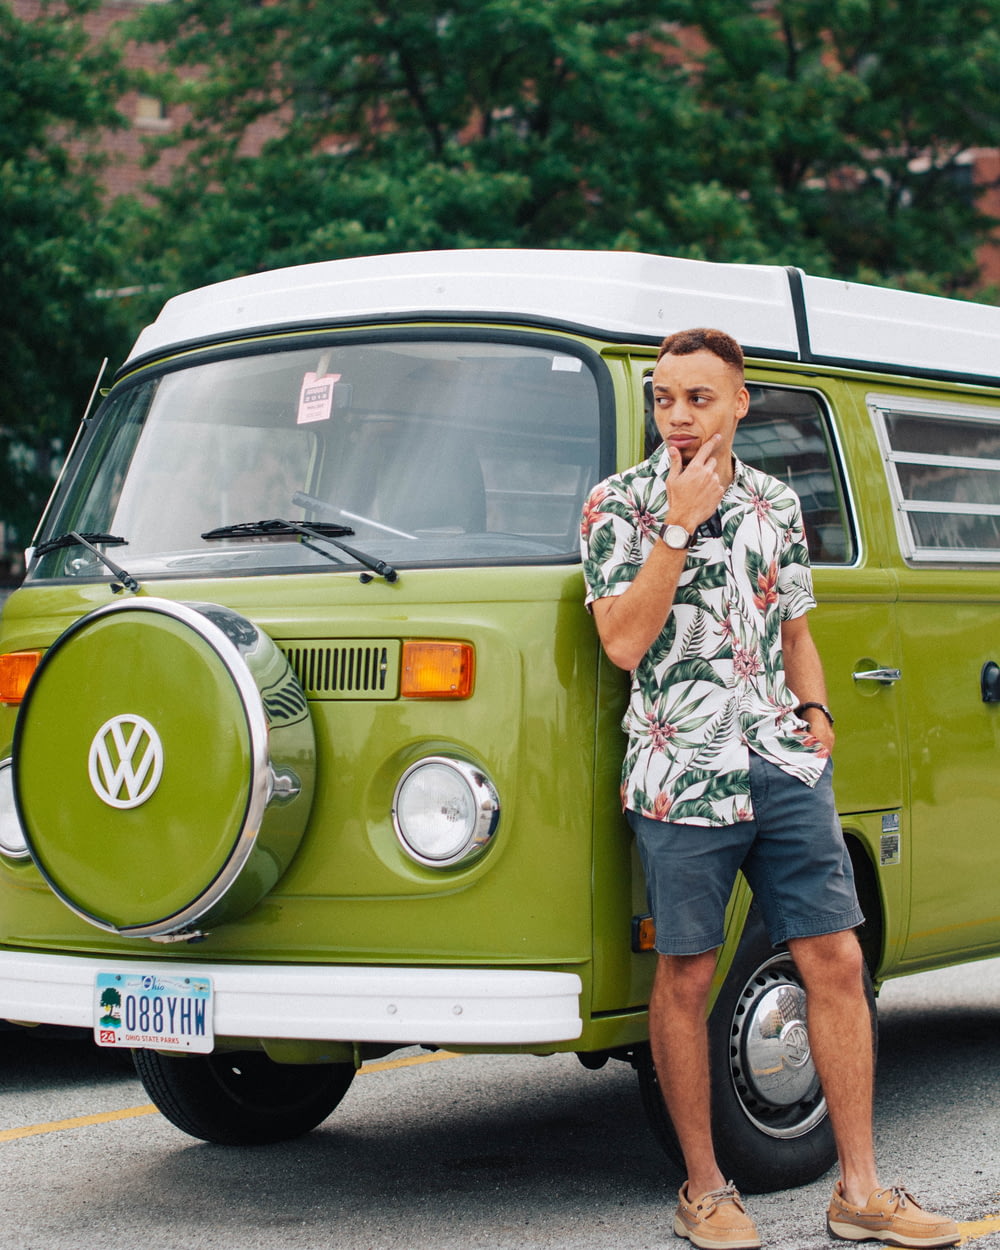 man leaning on green Volkswagen vehicle